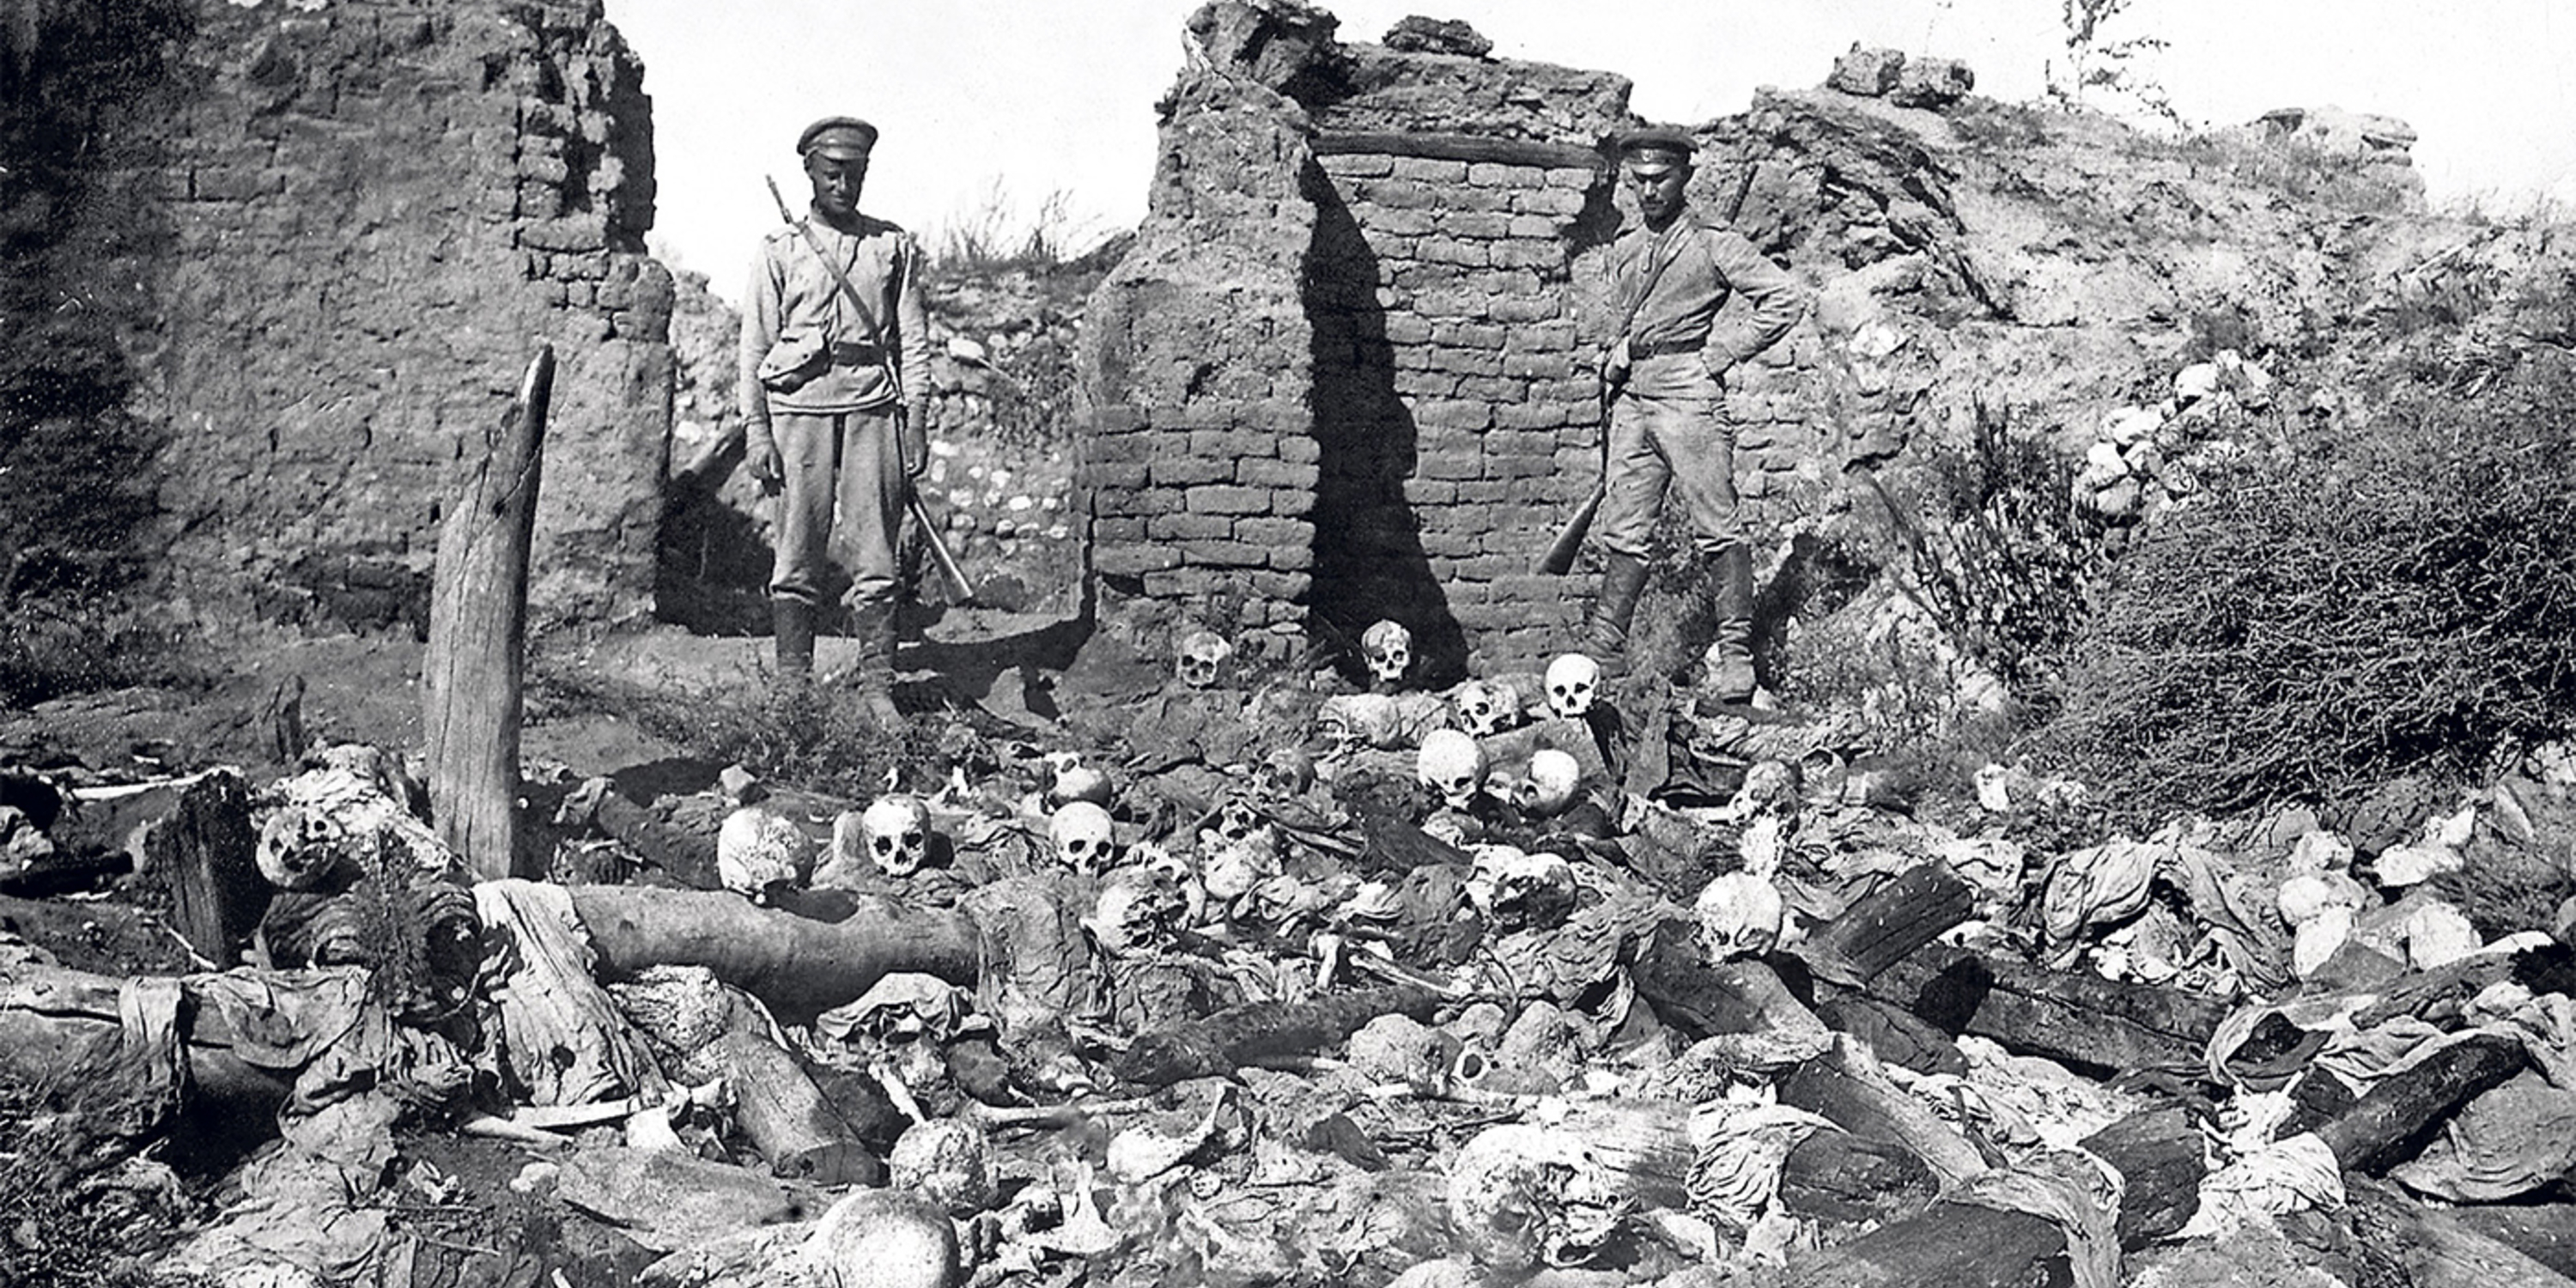 Turkish soldiers standing over skeletal remains during Armenian Genocide